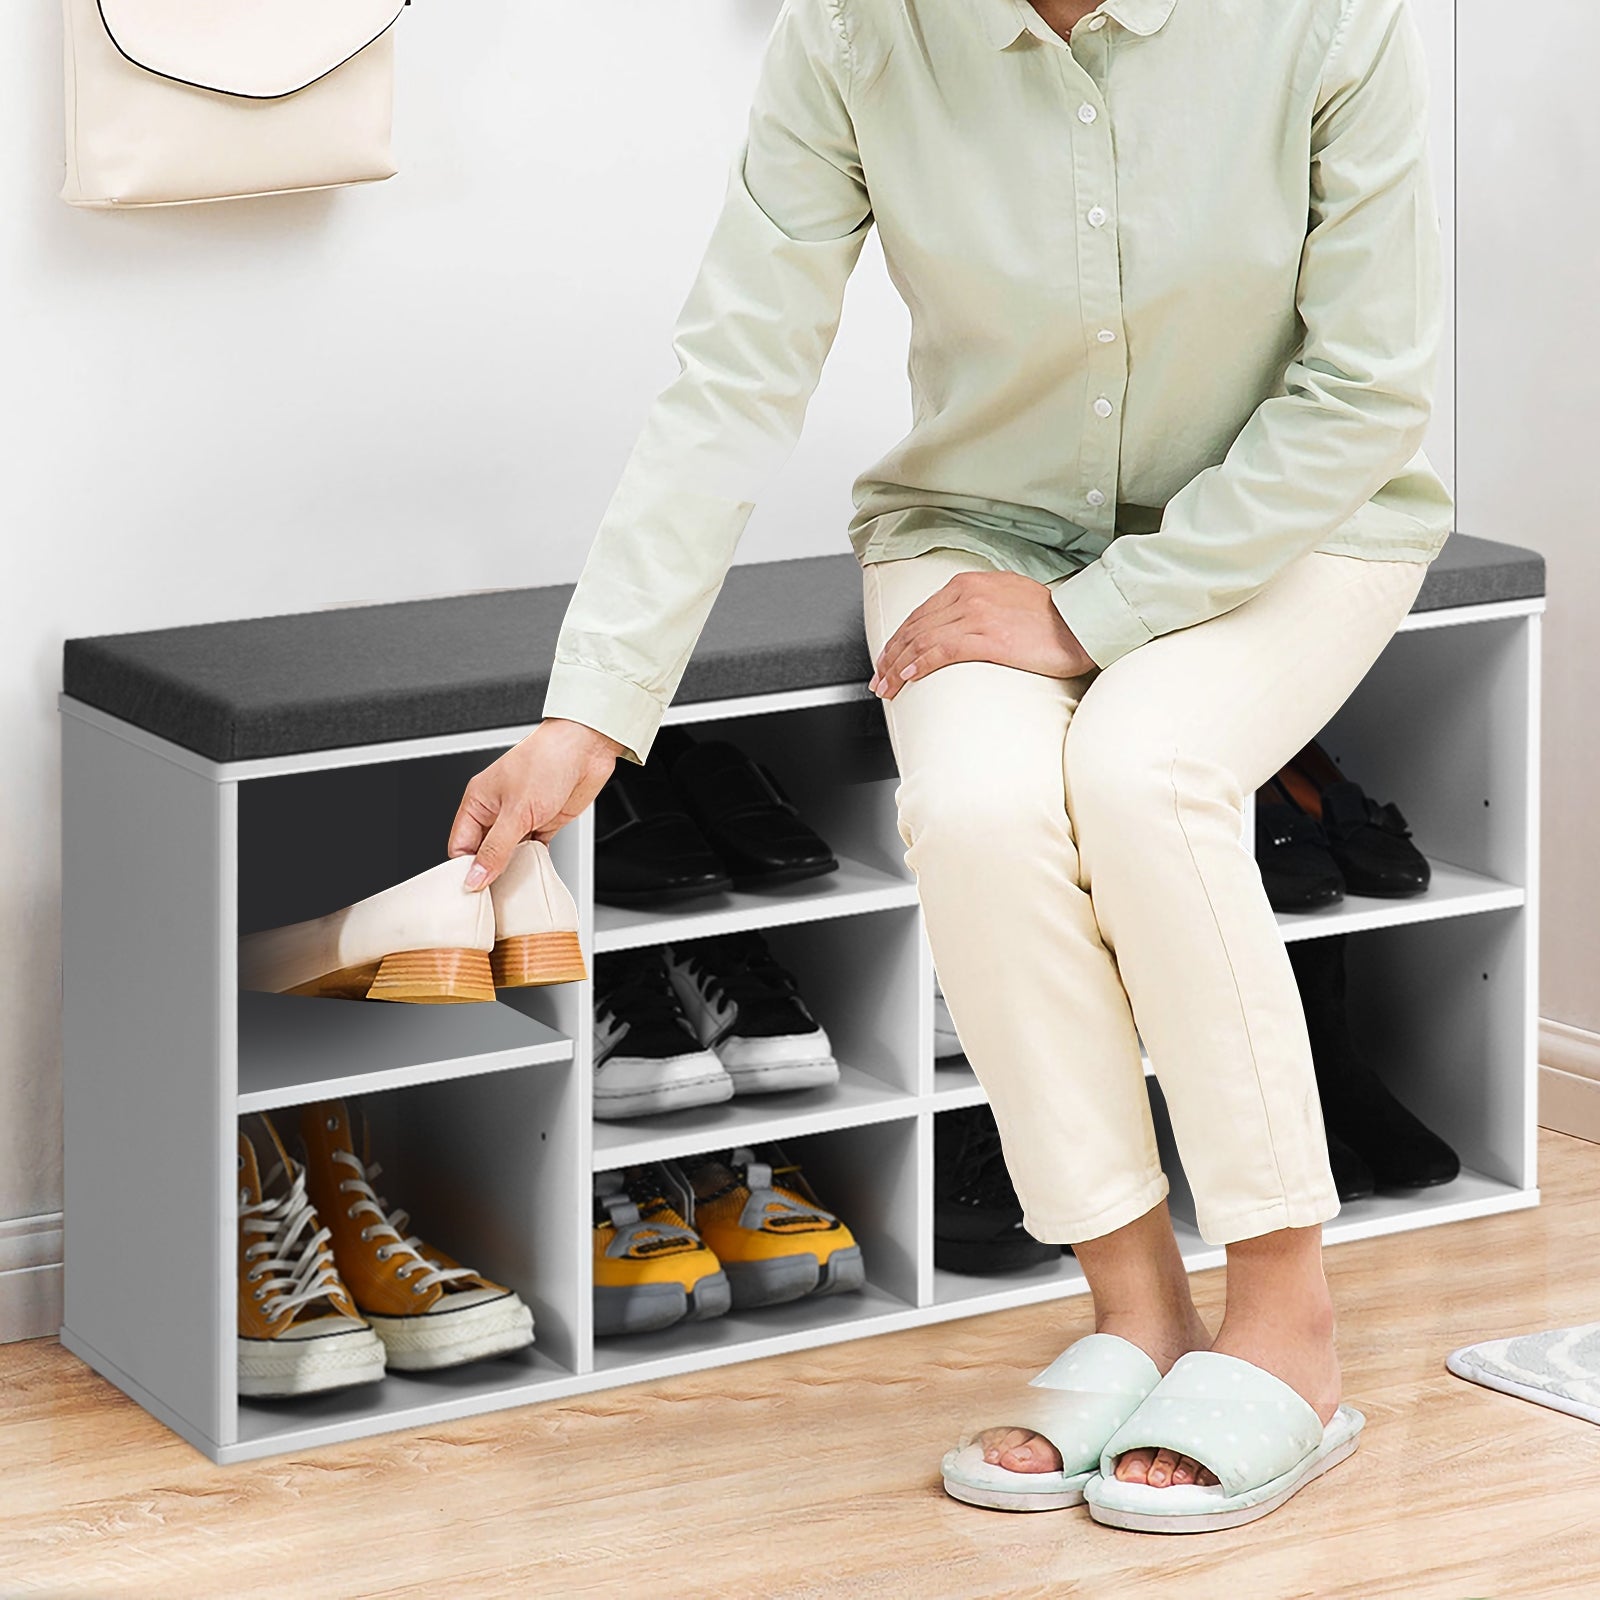 Stable and Rugged Structure: Constructed with high-quality chipboard and Melamine Veneer, the shoe storage bench is sturdy and durable, capable of bearing heavy loads.